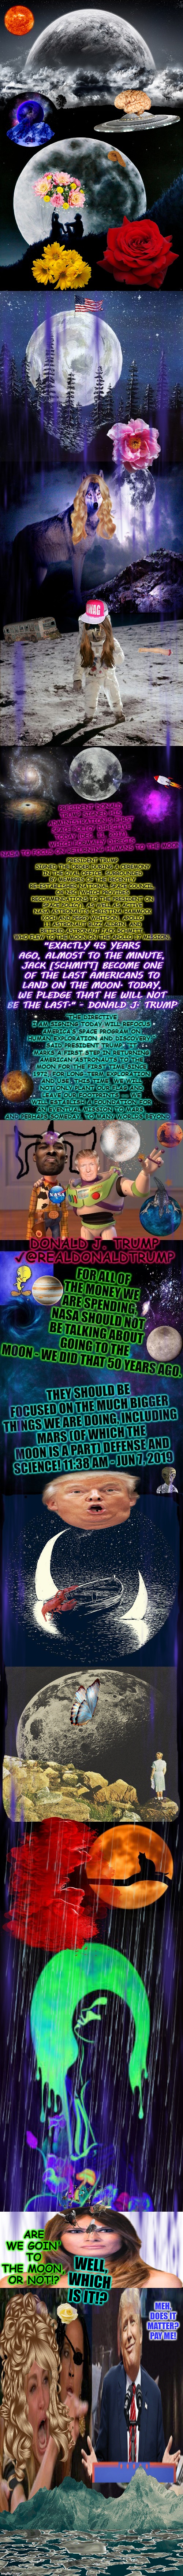 ARE WE GOIN' TO THE MOON, OR NOT!? WELL, WHICH IS IT!? MEH, DOES IT MATTER? PAY ME! | image tagged in so like are we going to the moon in the future or not | made w/ Imgflip meme maker